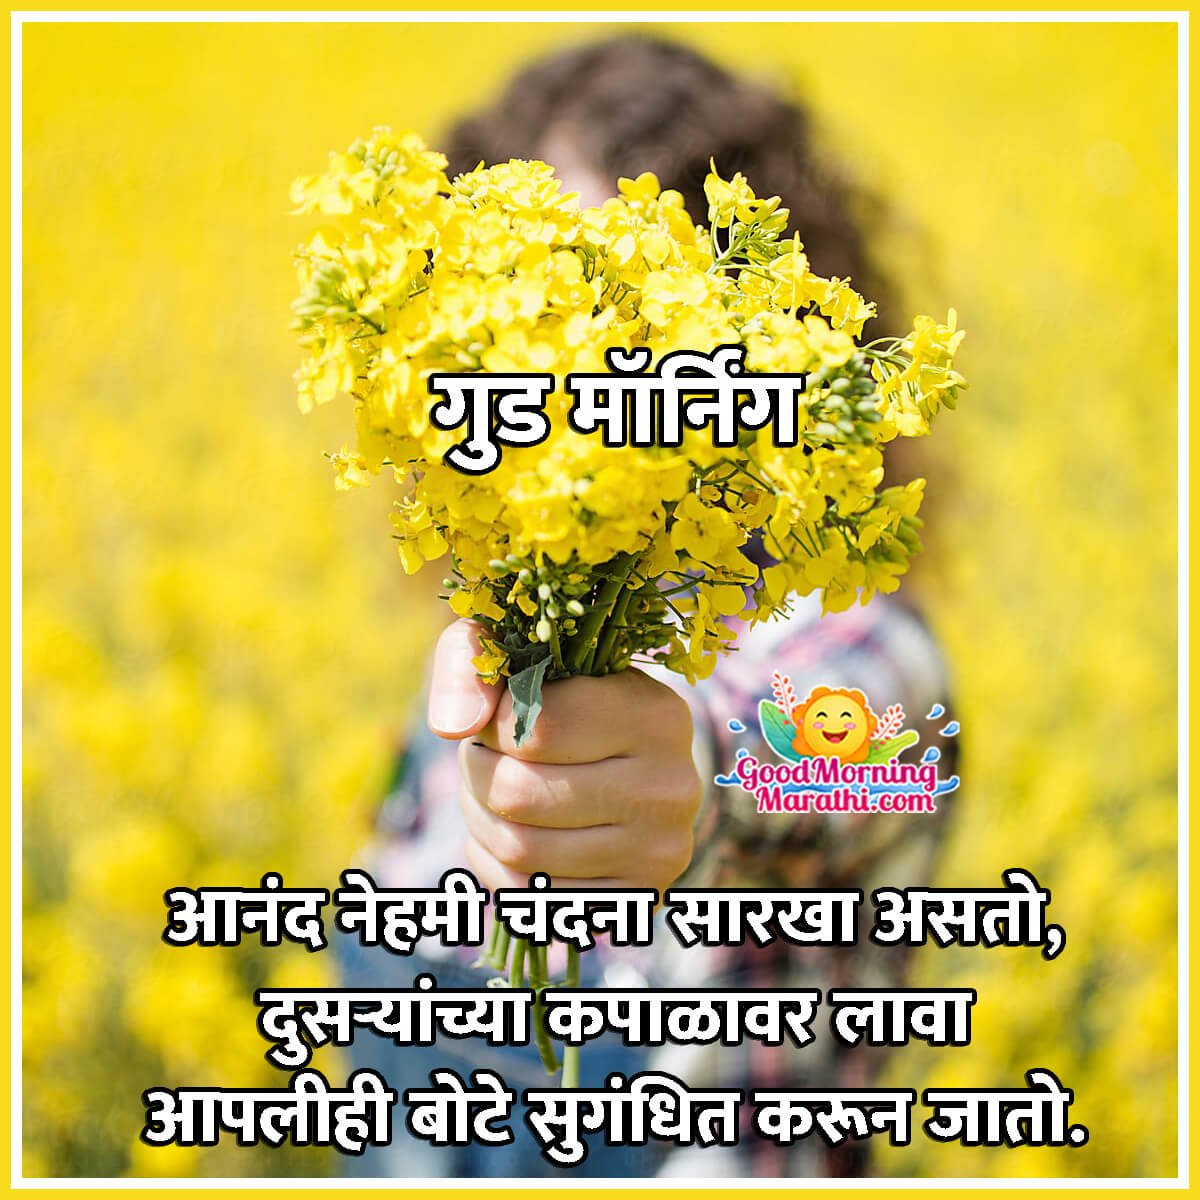 Good Morning Happiness Quotes Images In Marathi - Good Morning ...